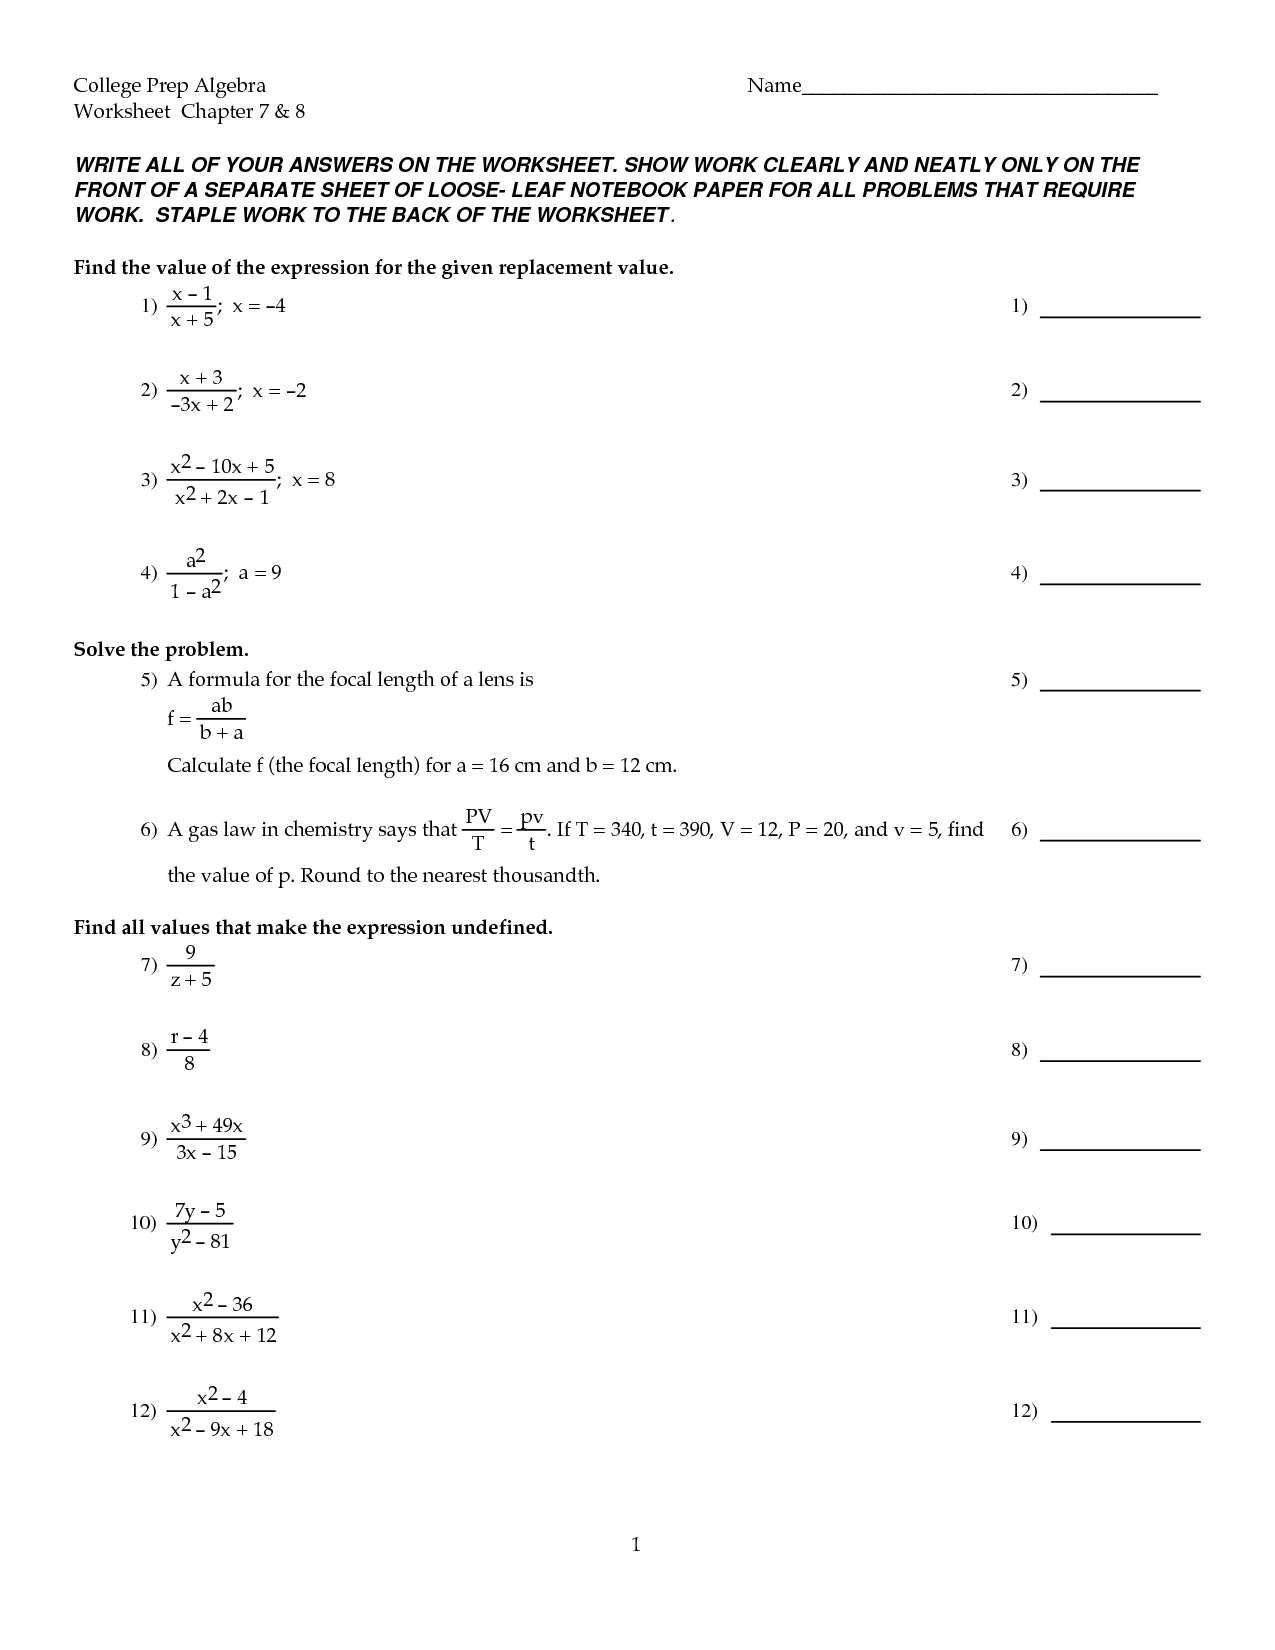 13-best-images-of-college-english-1-worksheets-vocabulary-worksheets-english-grammar